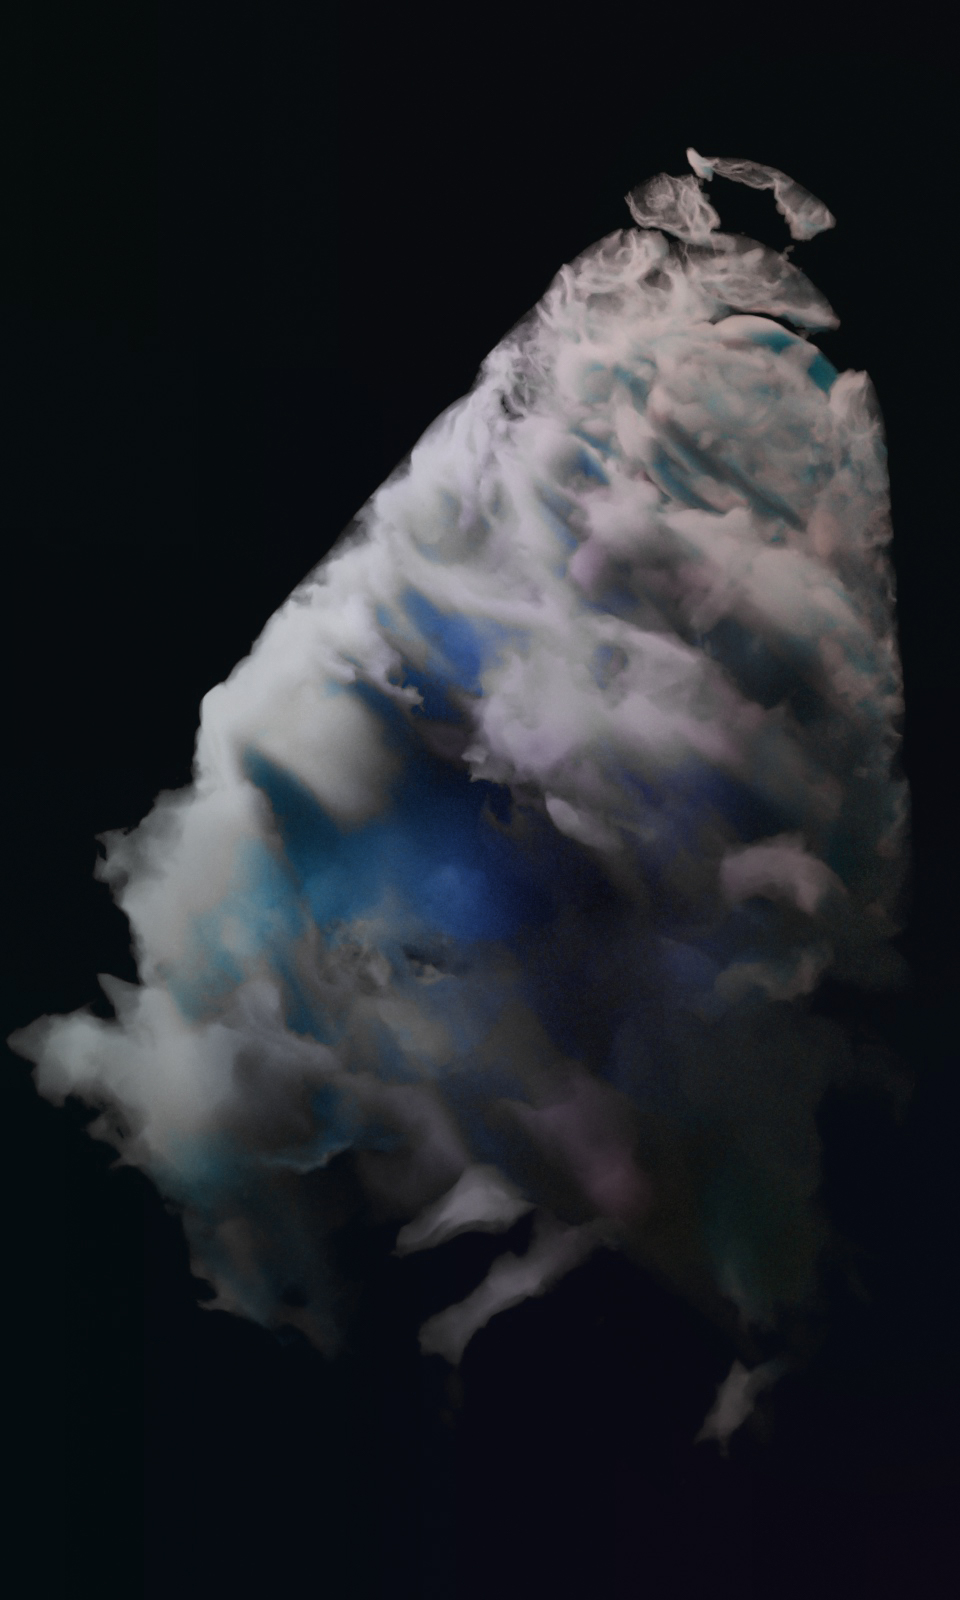 Cinema-4D-Tests-Cloud-from-Sphere-3-retouched-2